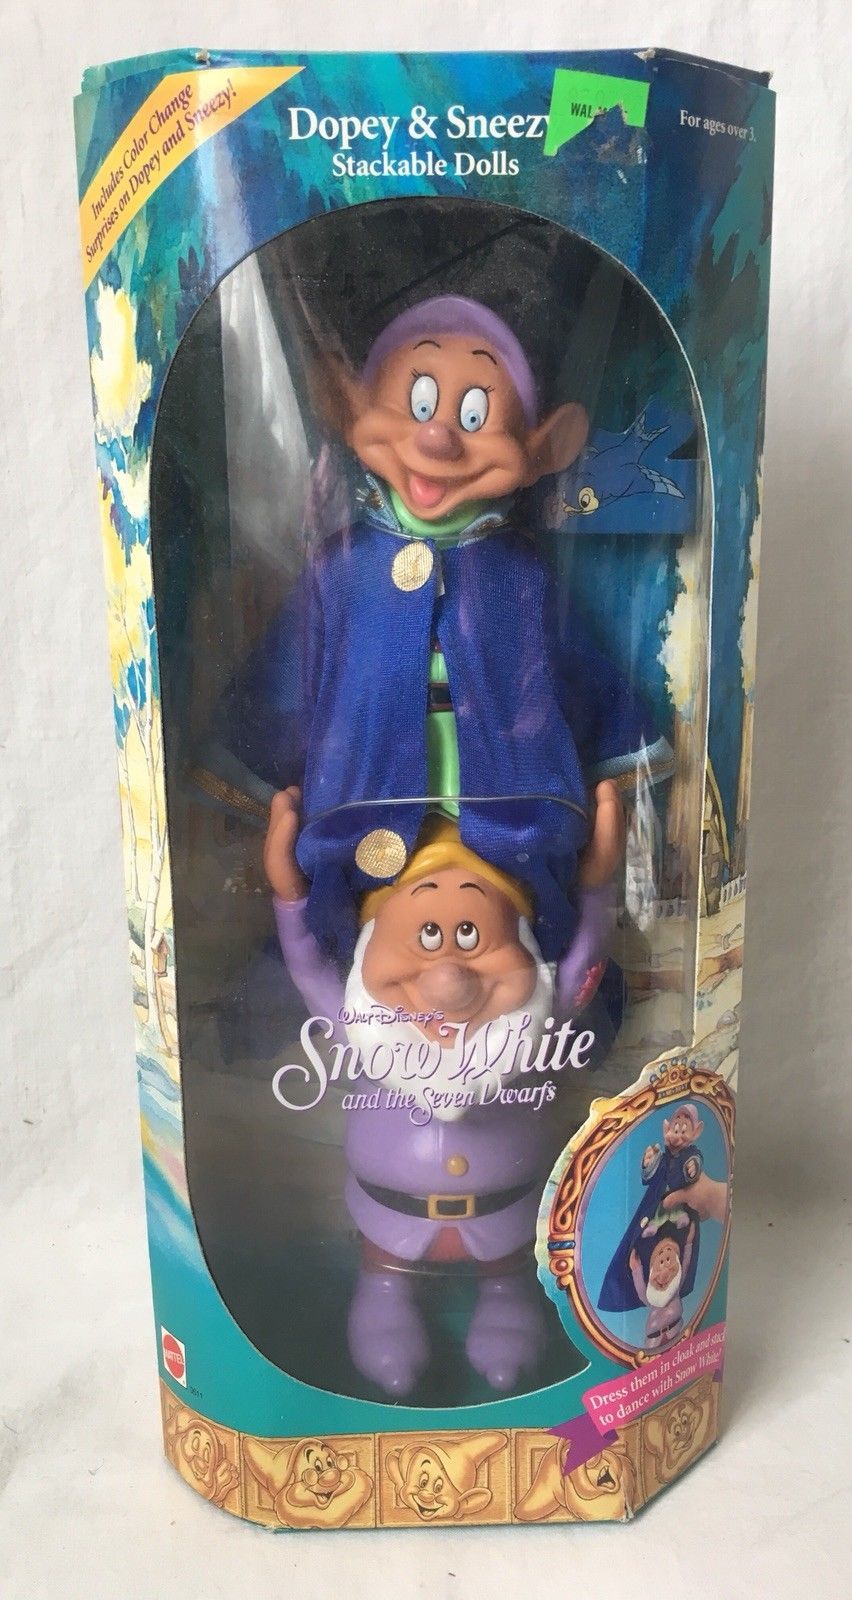 Disney Snow White And The 7 Dwarfs Dopey And Sneezy Stackable Dolls Figures 1992 Action Figures 